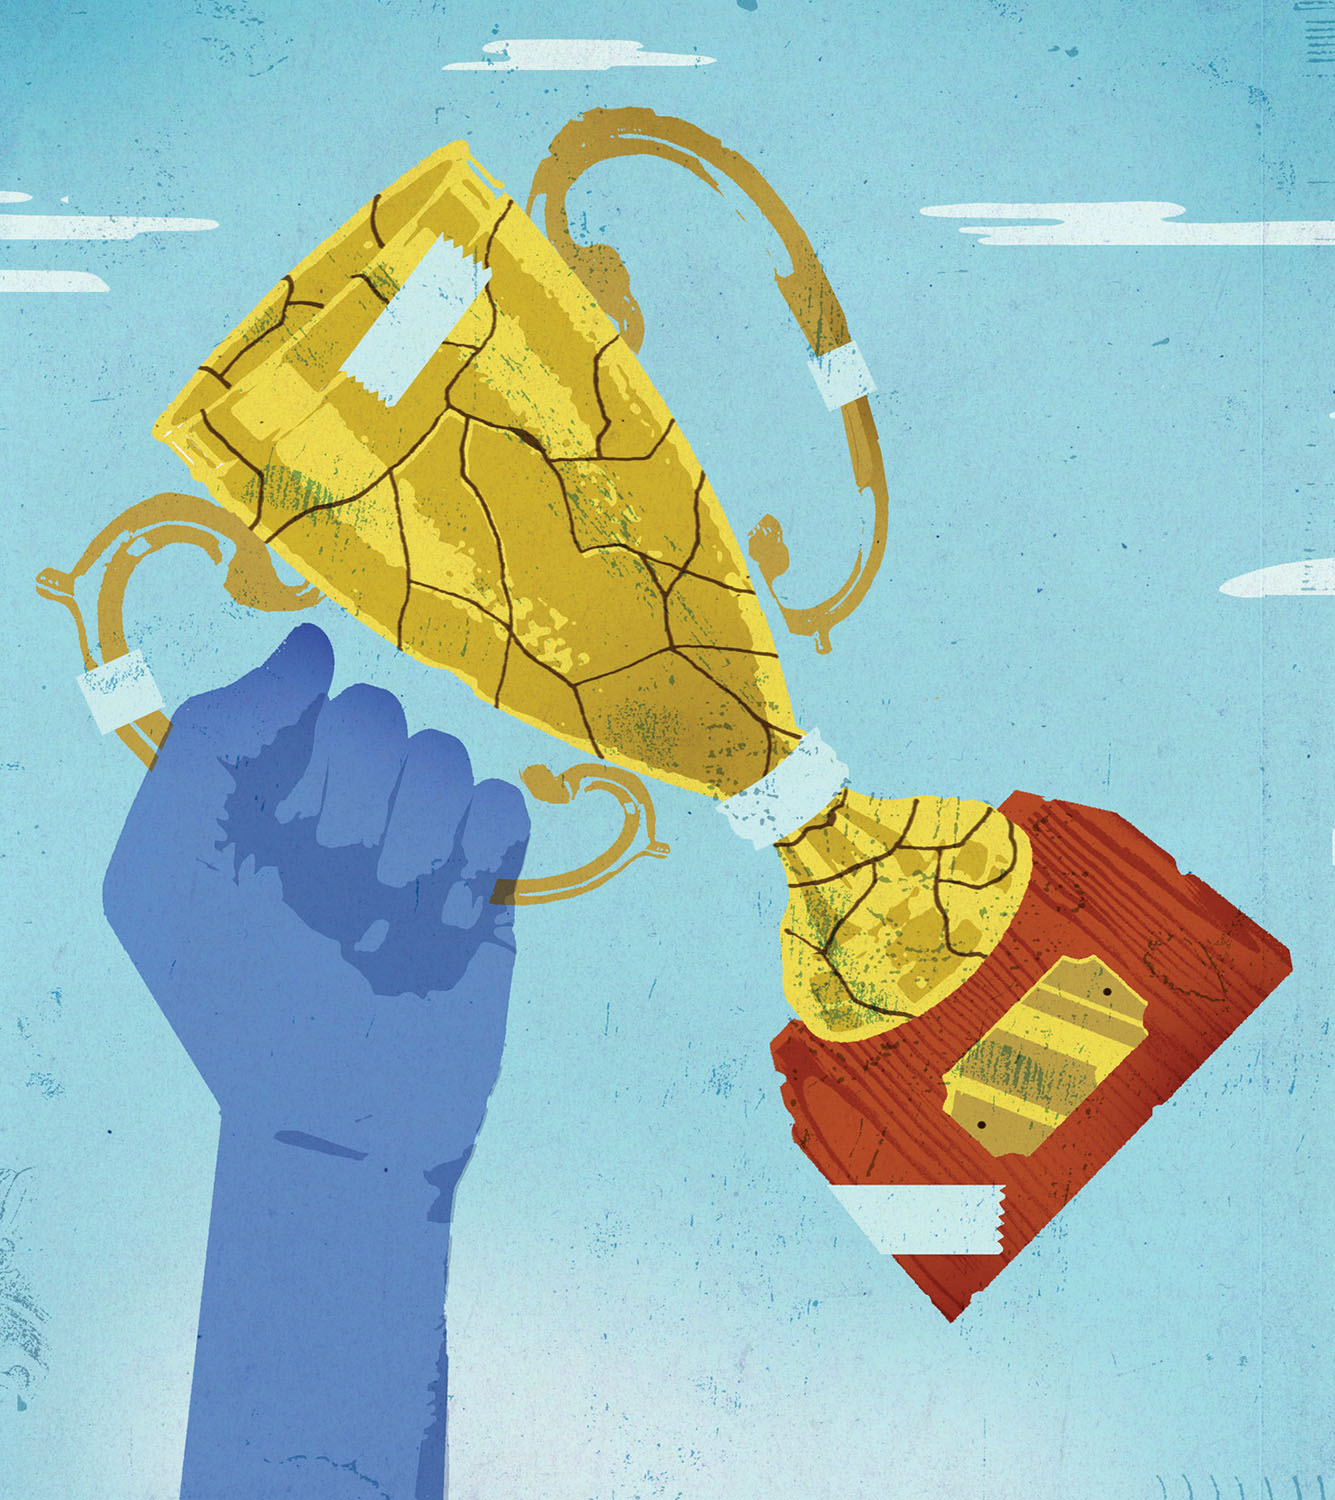 an illustration of a hand holding up a cracked trophy with tape holding it together